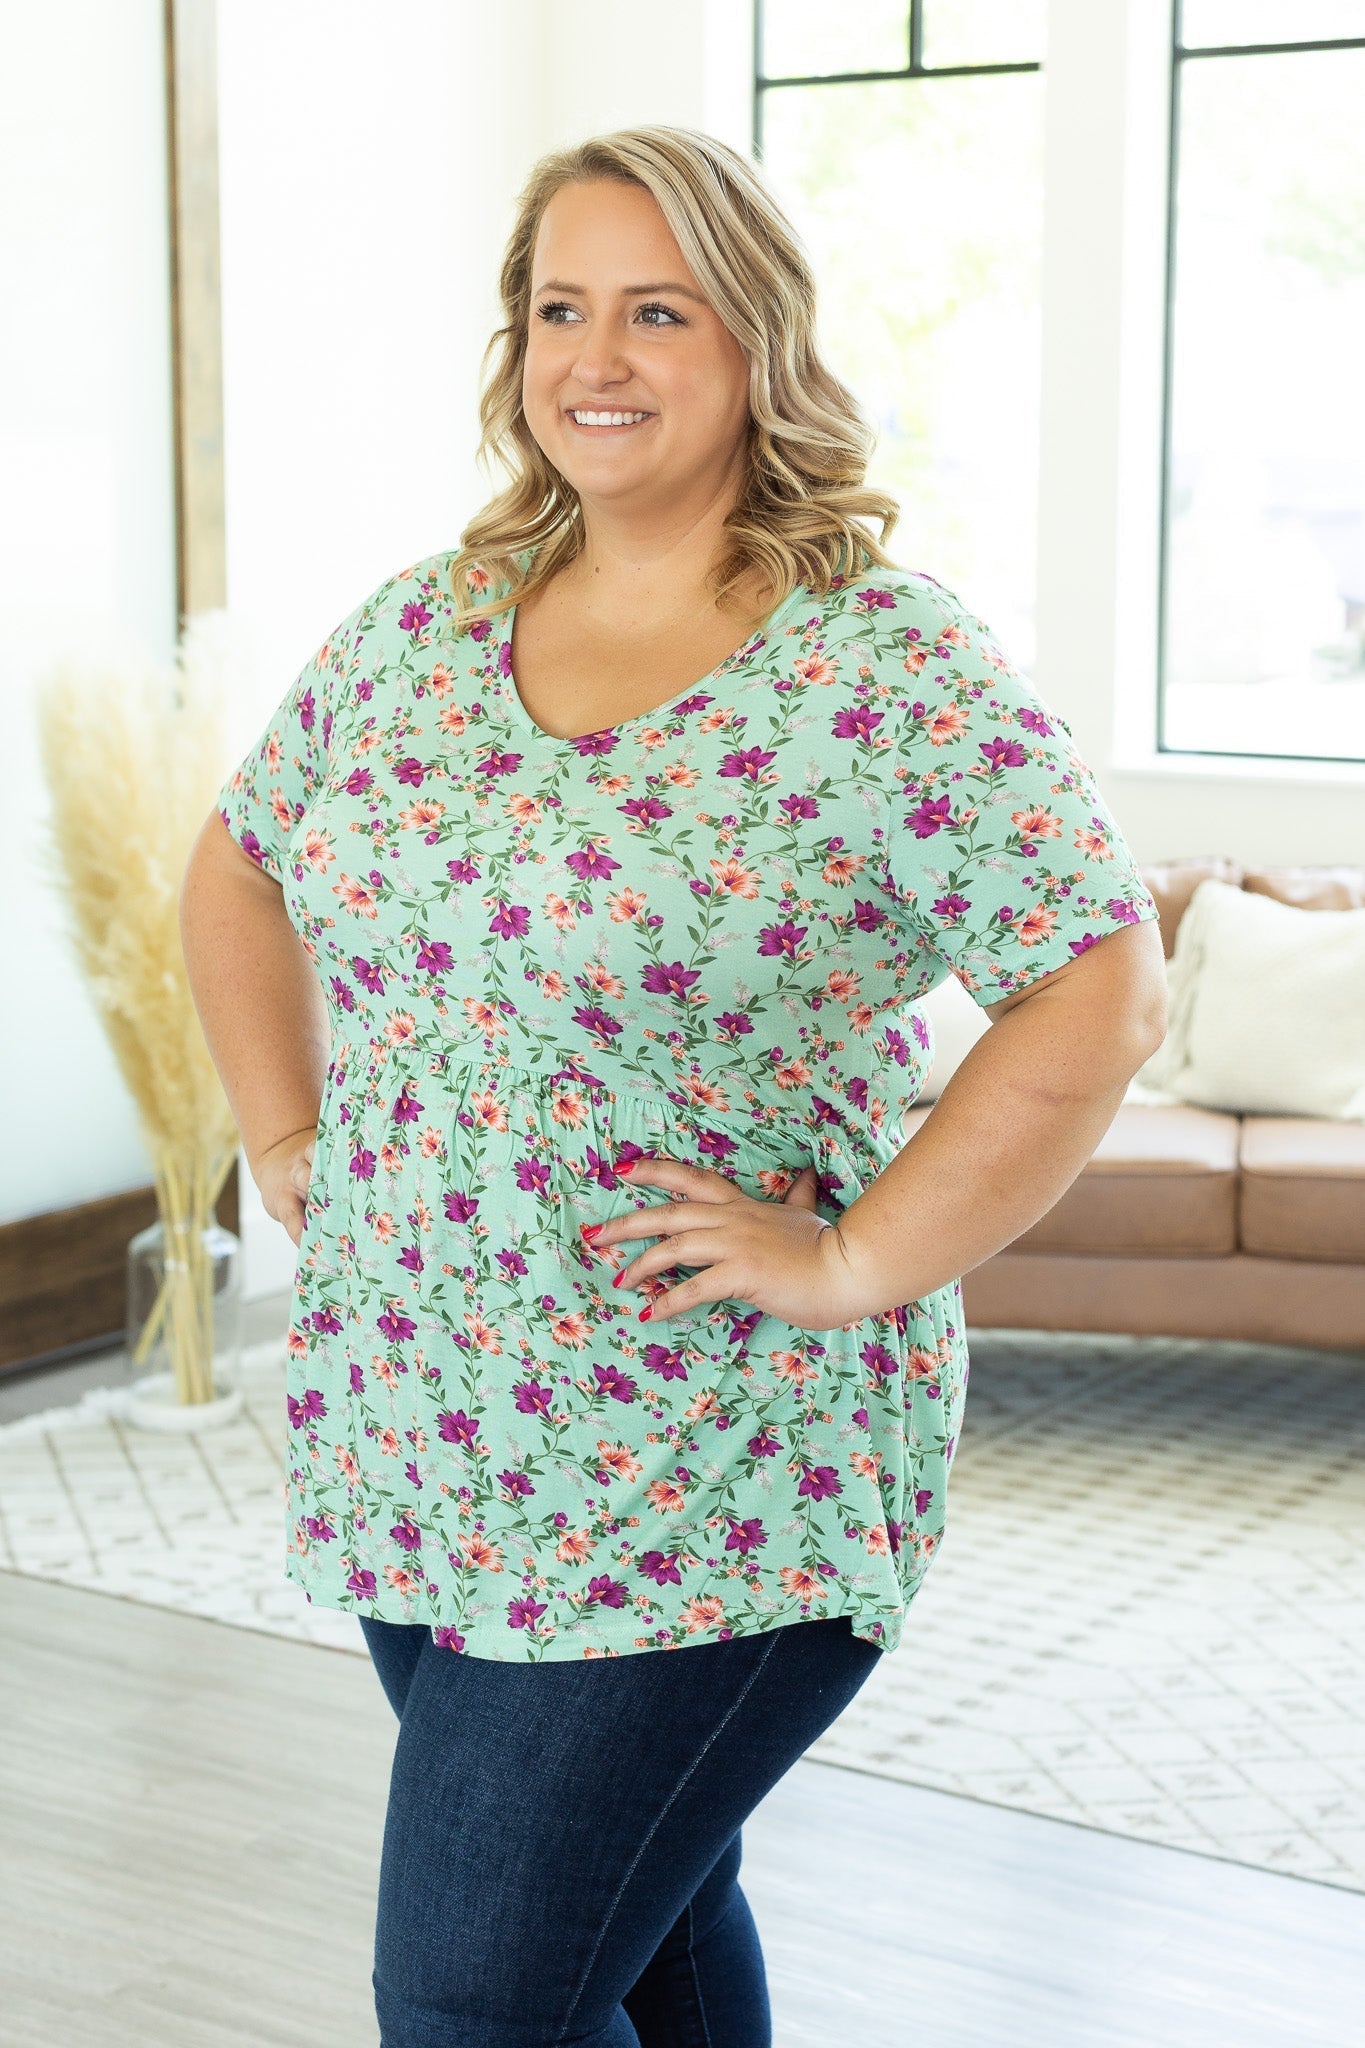 IN STOCK Sarah Ruffle Top - Mint Floral